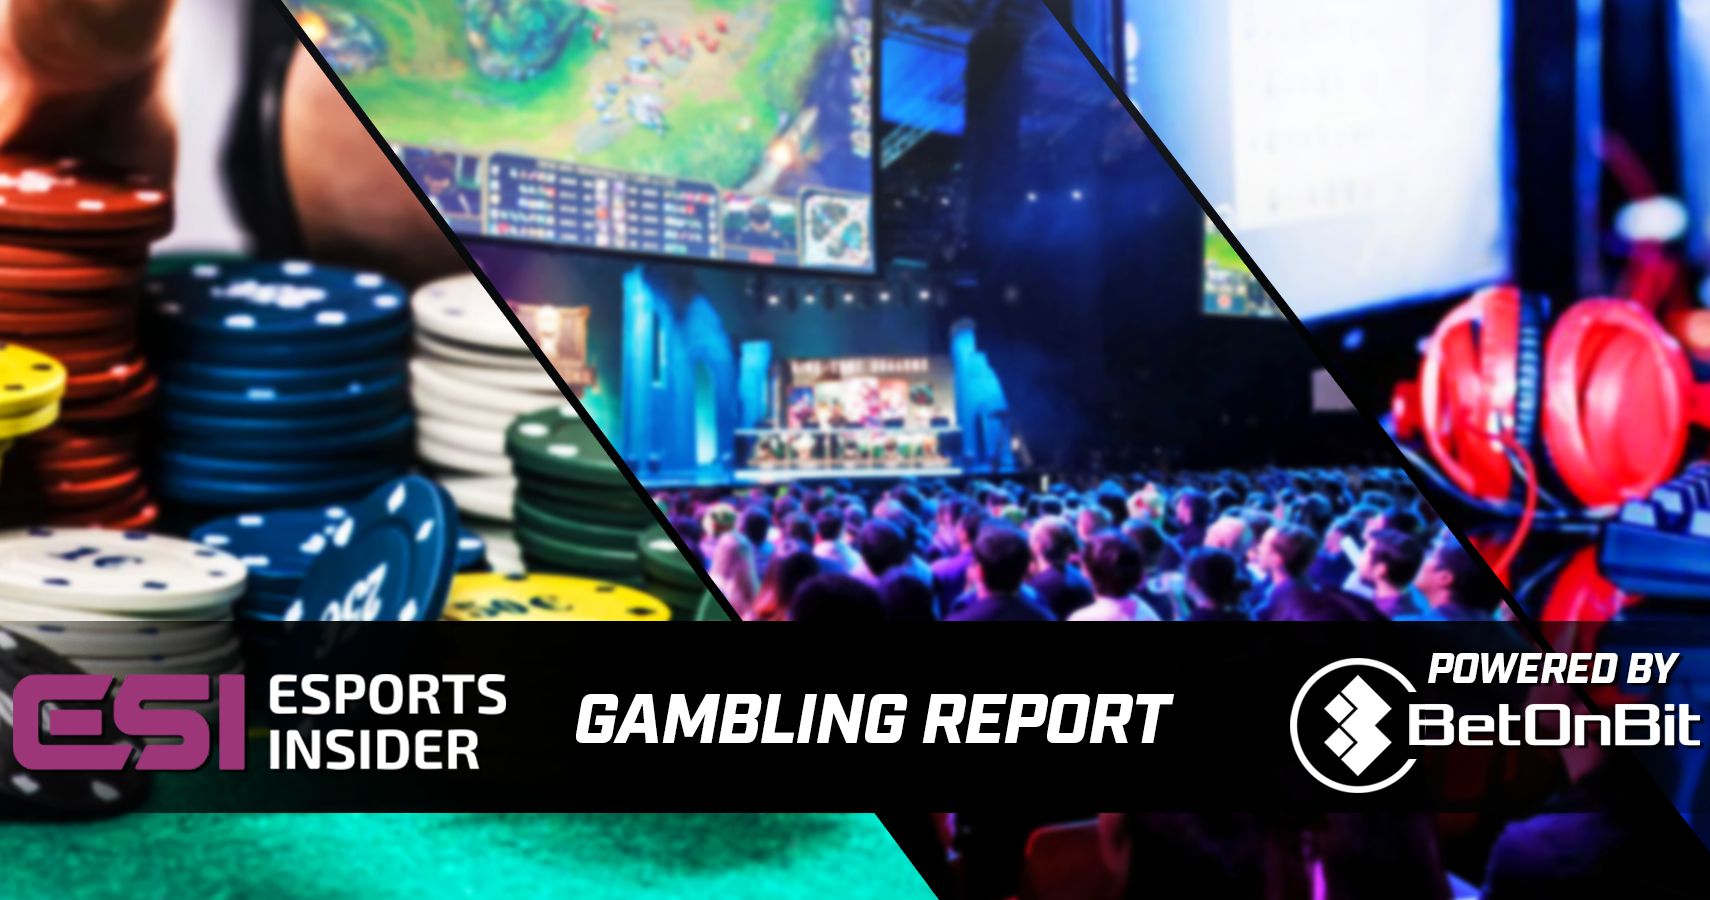 The Double Threat Of Addiction In Esports Gambling